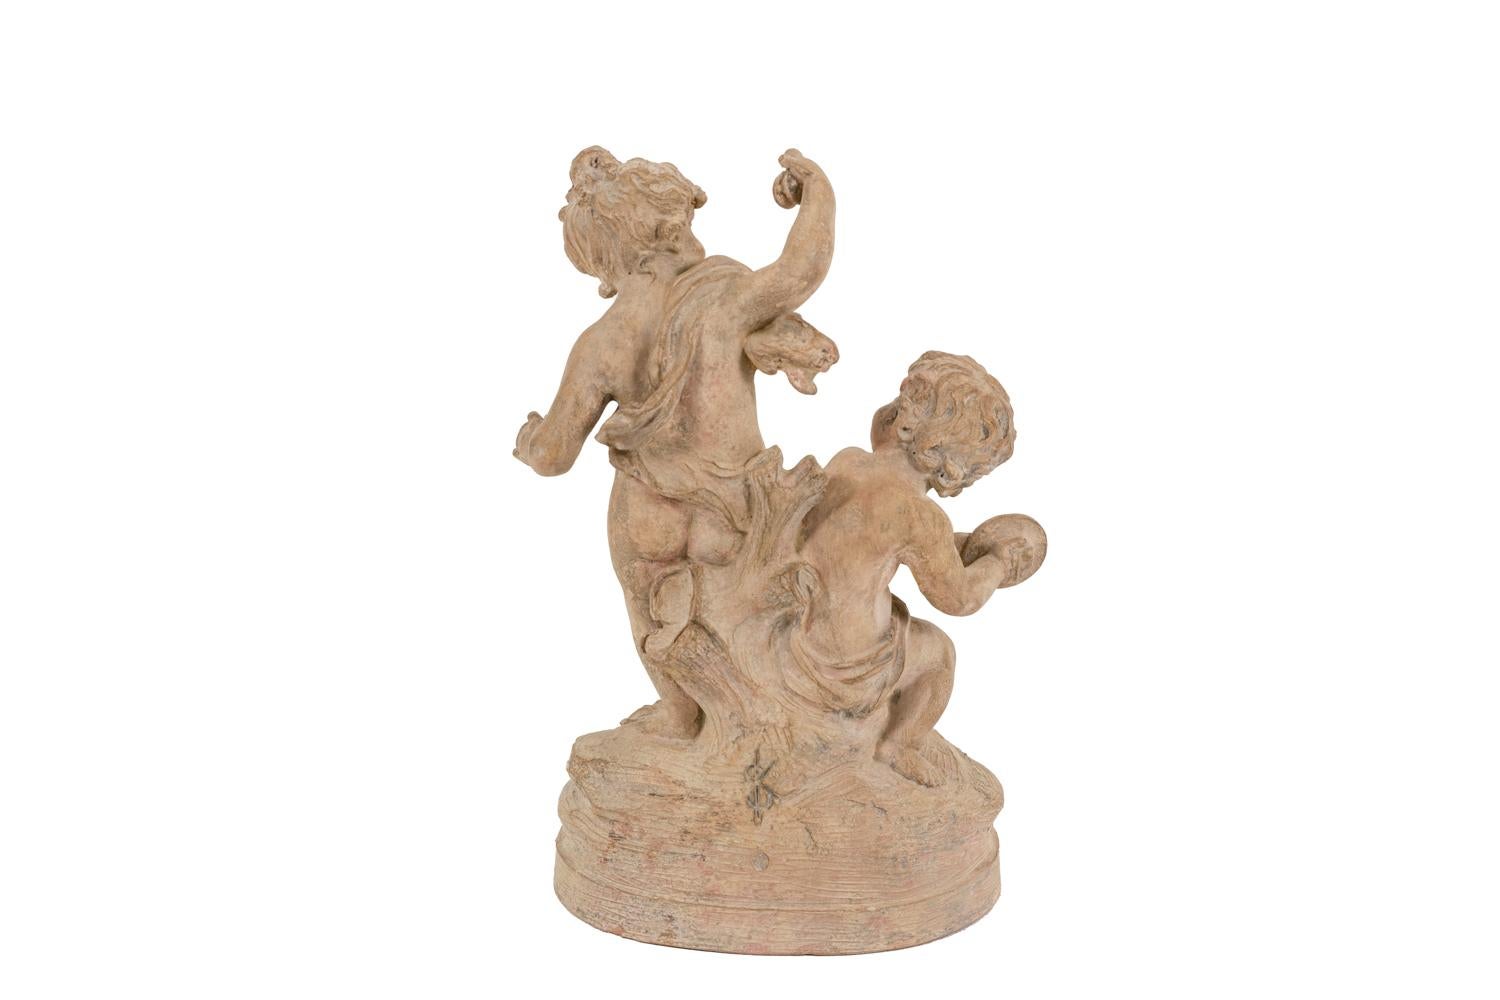 Sylvain Kingsburger, signed

Sculpture in terracotta figuring children wearing fabric sheets and playing music. One stands up wears a cloth and plays castanets. The other one plays cymbals. They are both leaning on a tree turn. The ensemble stands